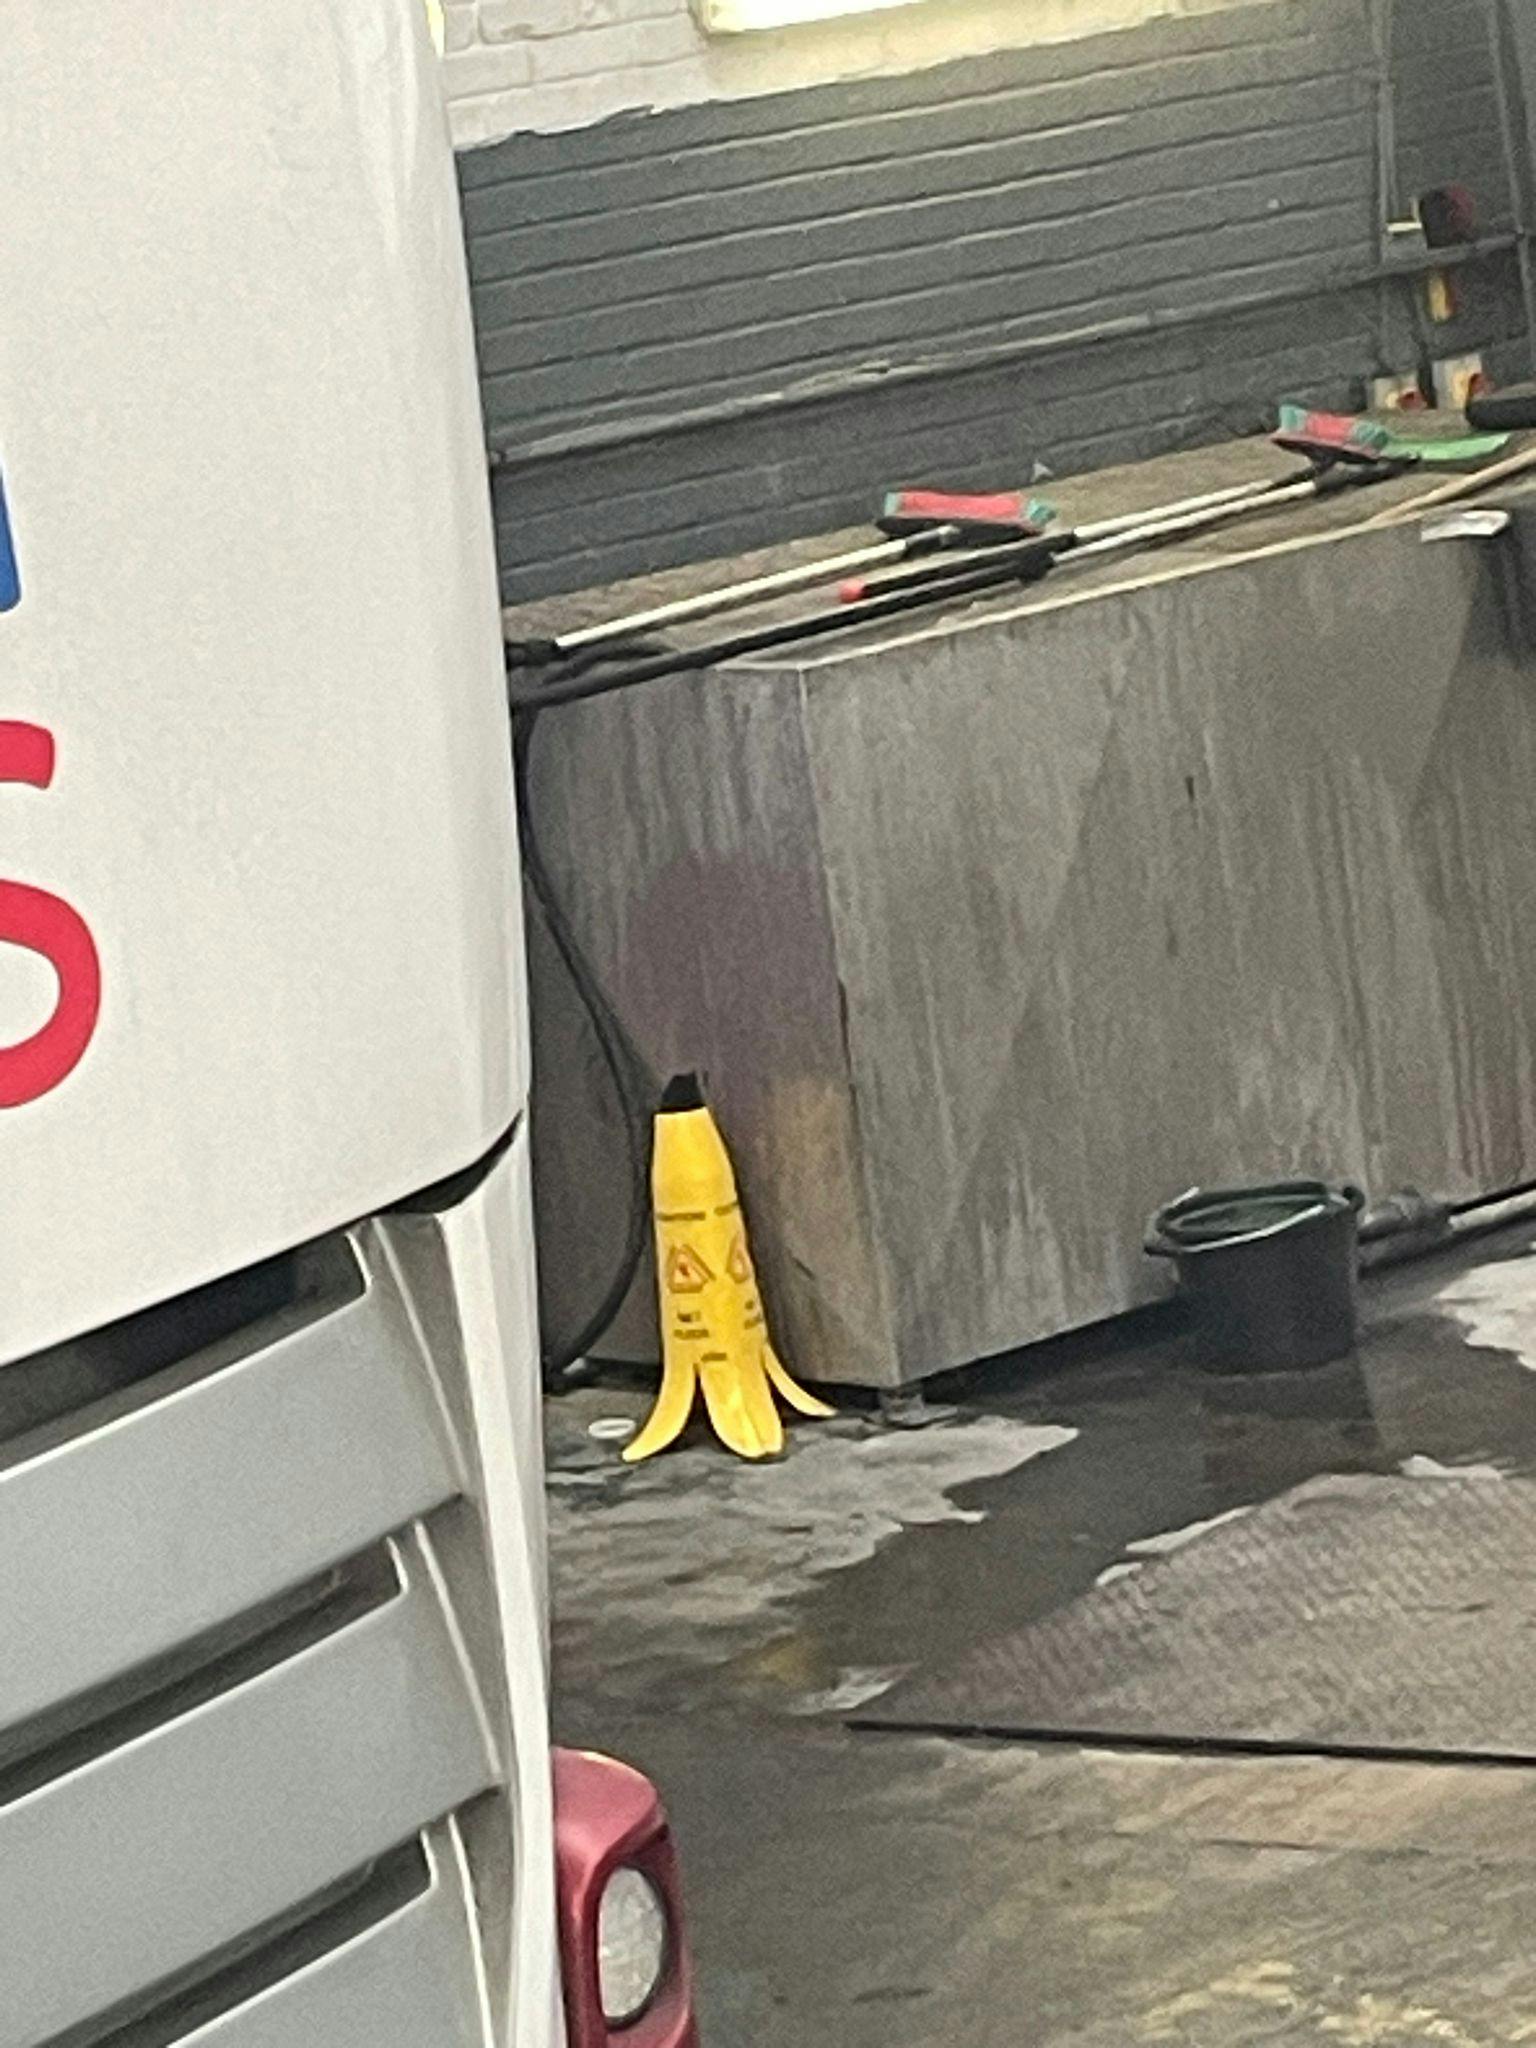 Photograph of a room with a water spillage on the floor. Next to the spillage, a "wet floor" warning sign in the shape of a banana.